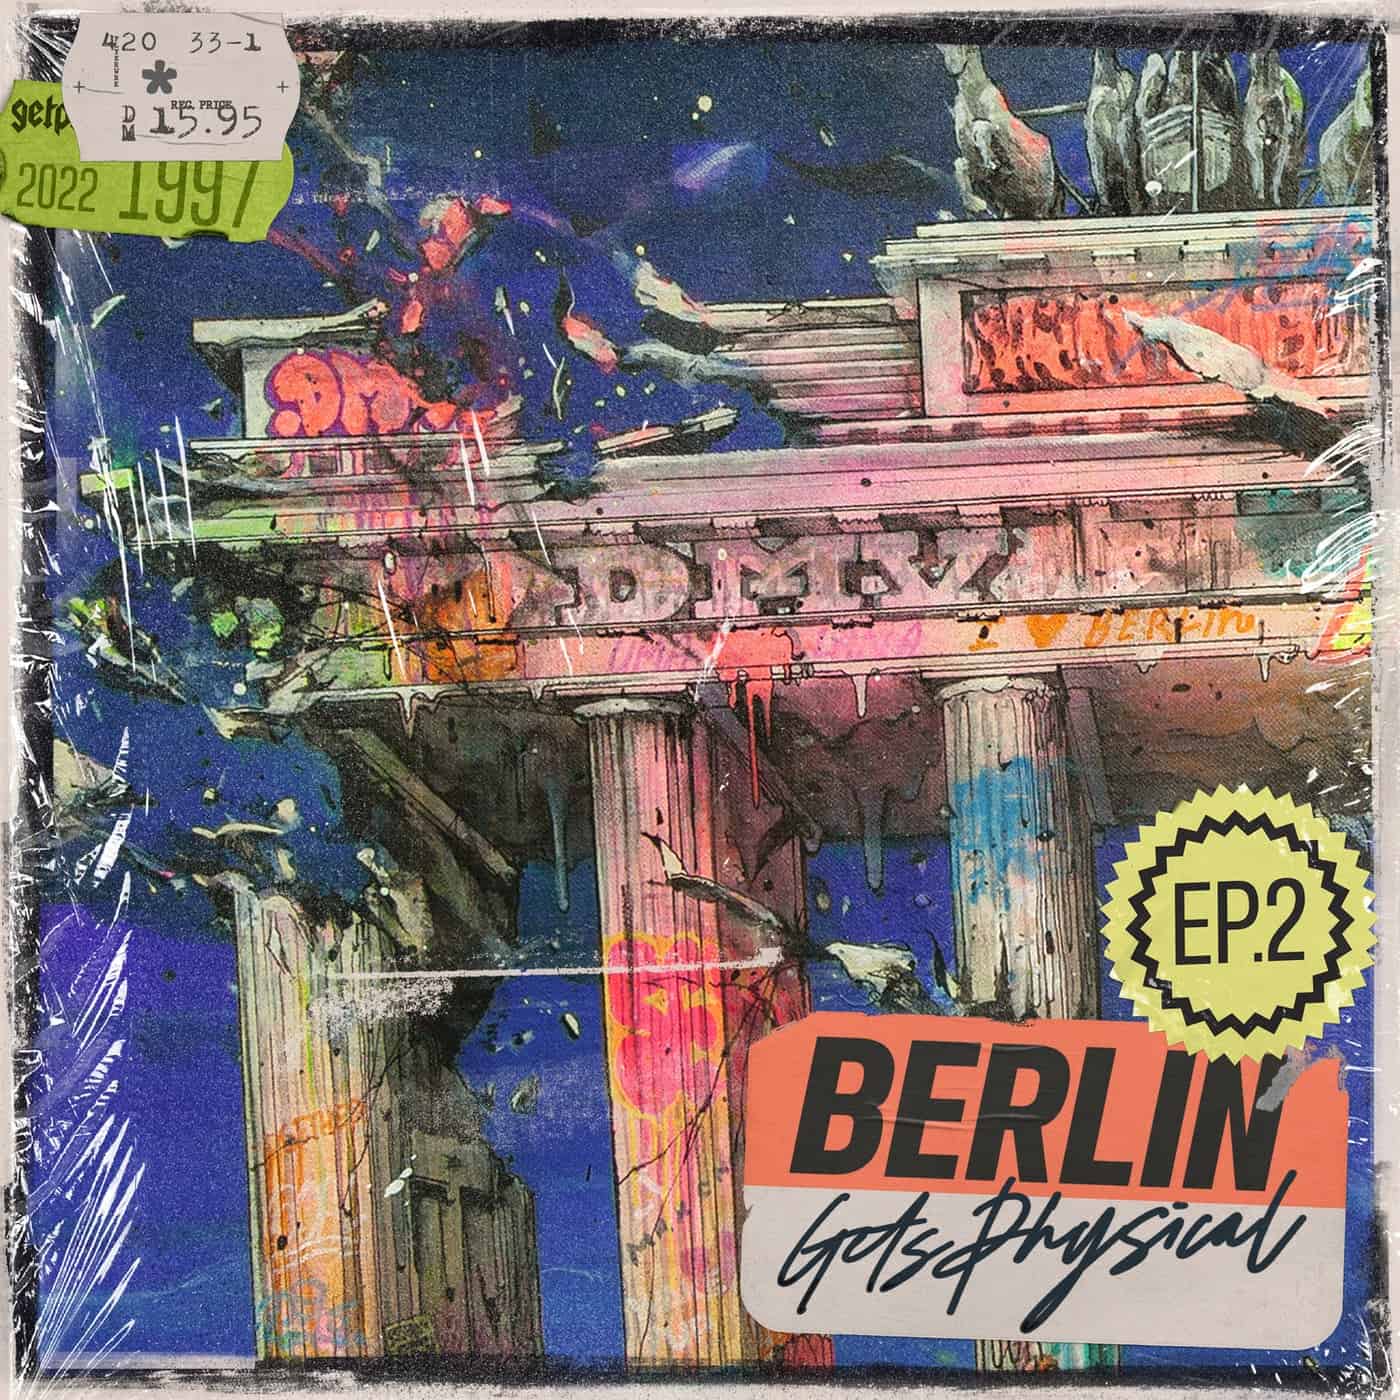 image cover: Daniel Jaeger, Valenti (DE), Freudenthal, Nowhere People - Berlin Gets Physical EP2 / GPM684